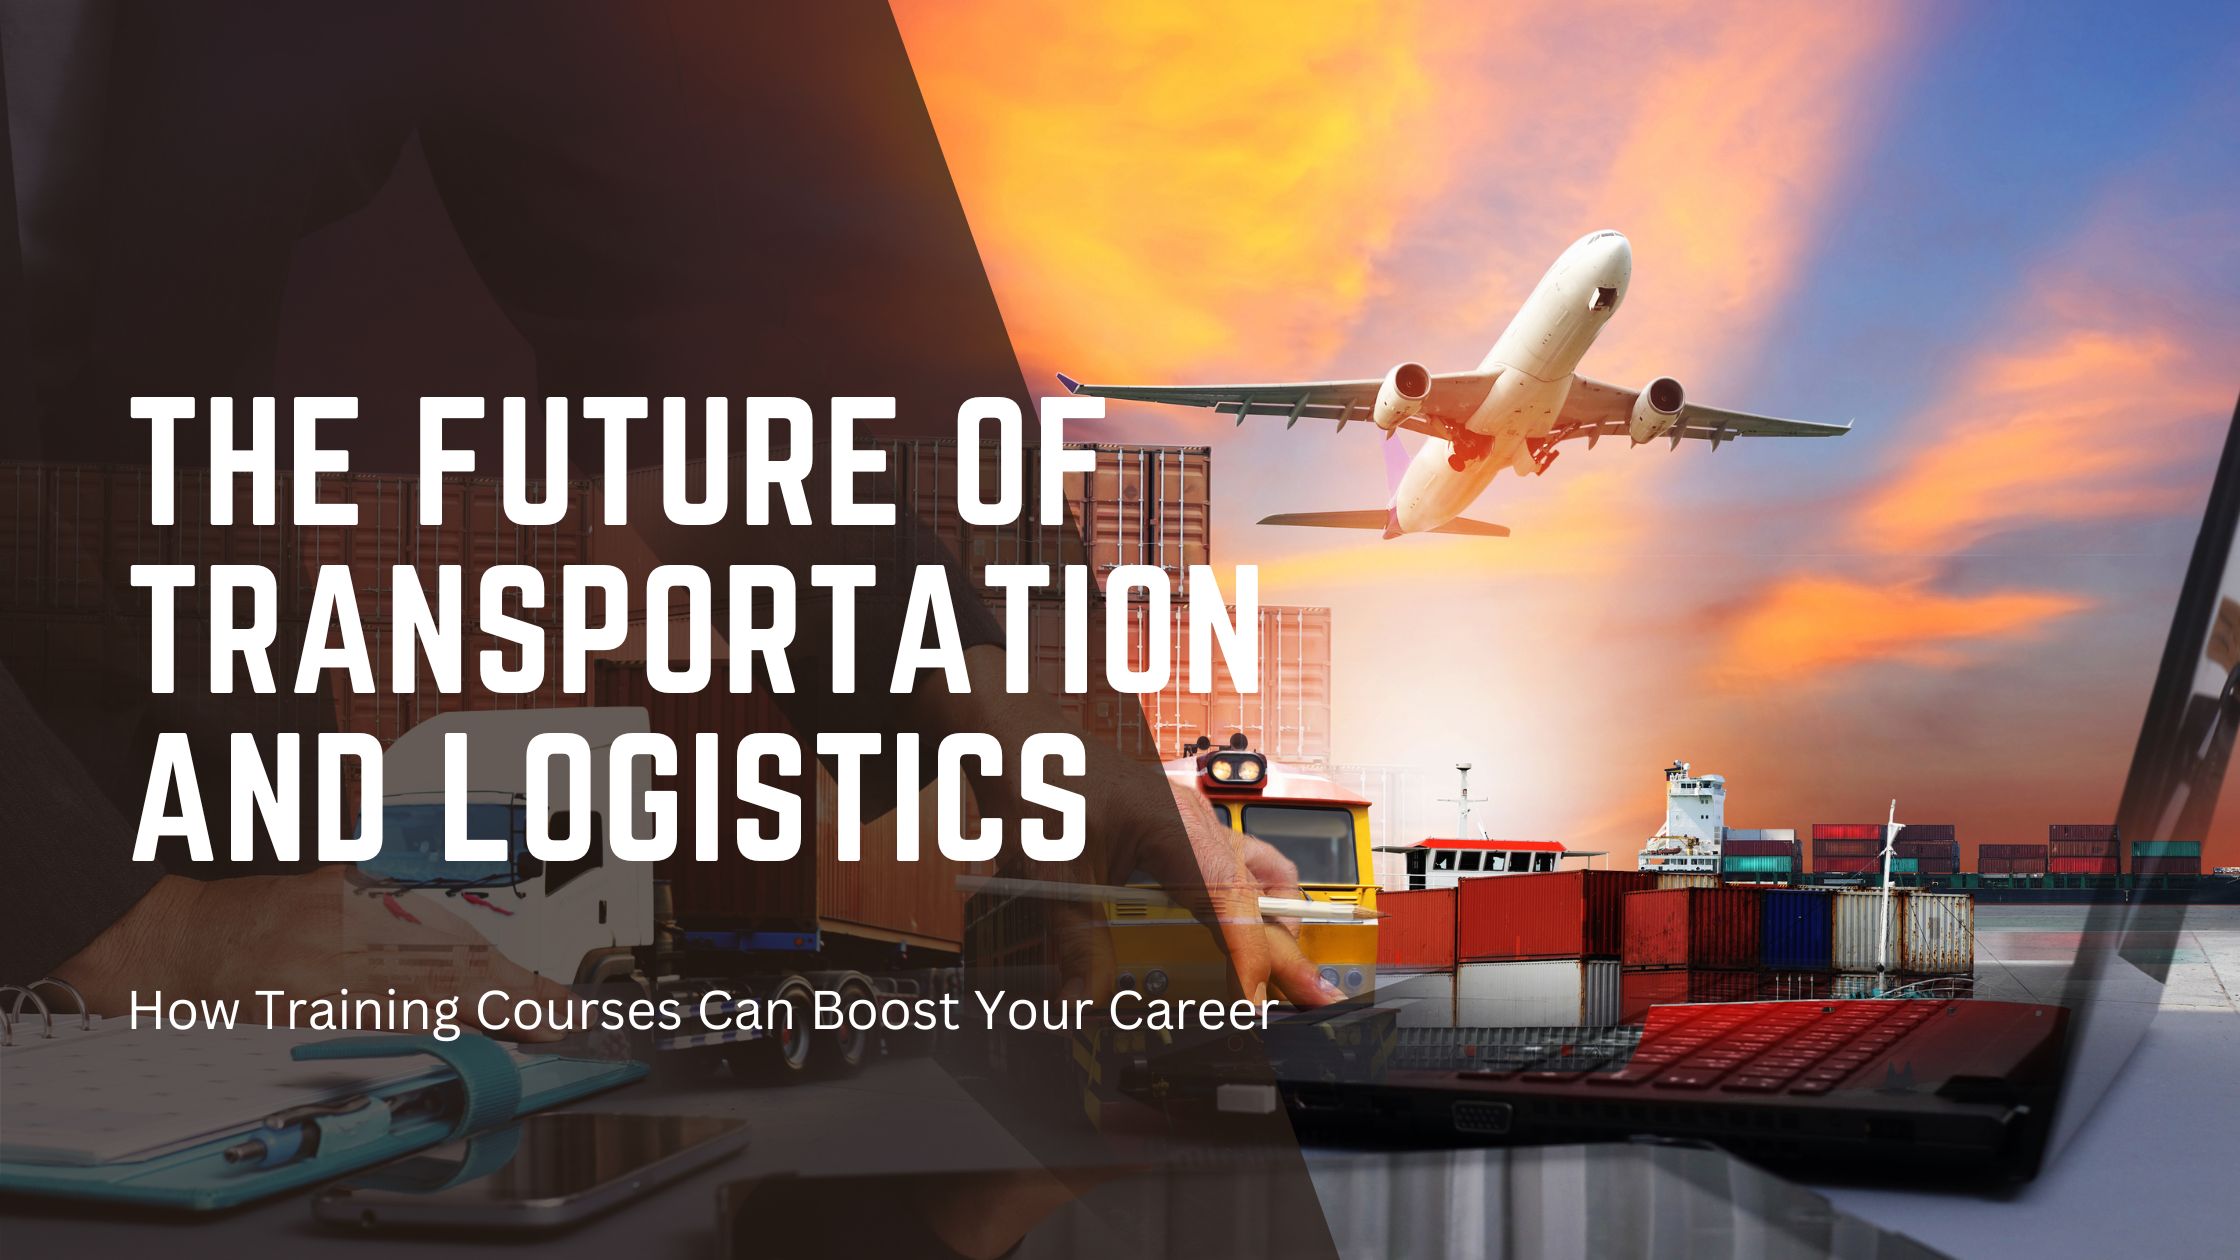 The Future of Transportation and Logistics: How Training Courses Can Boost Your Career